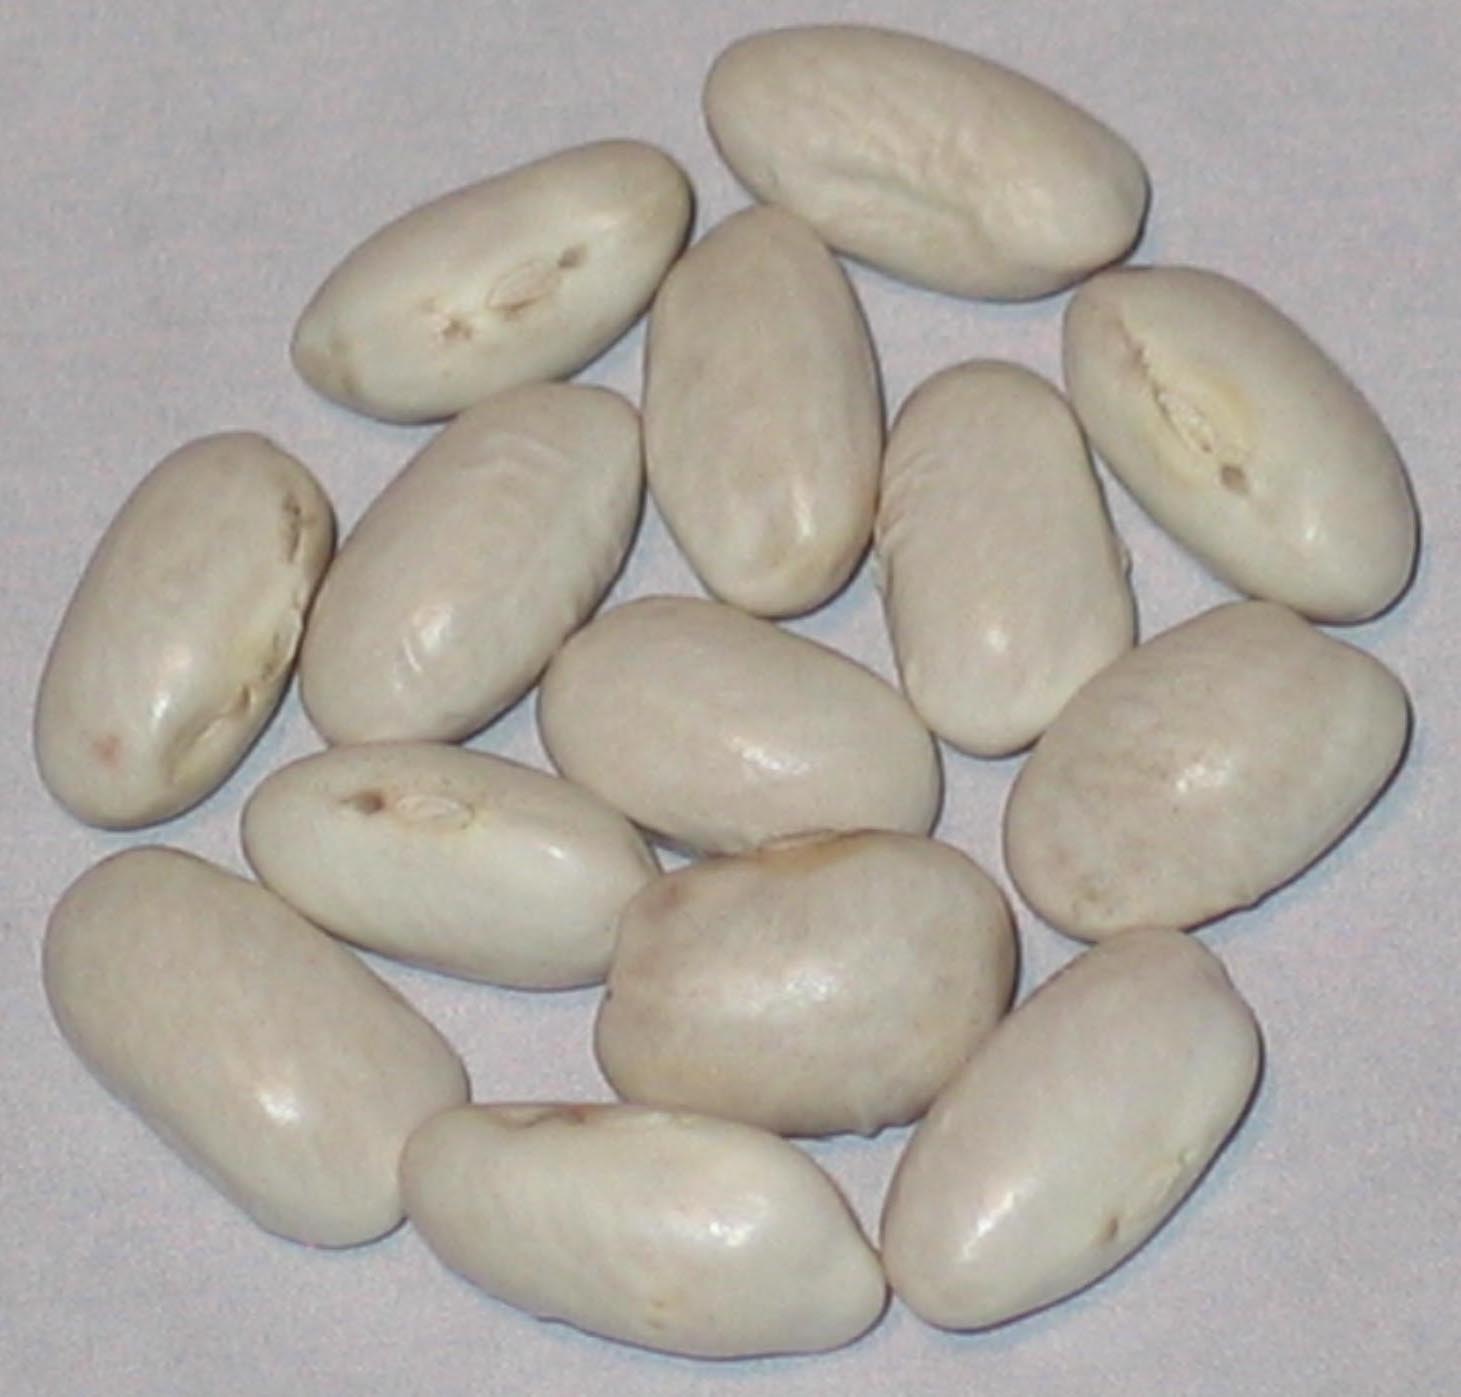 image of Barnes Mountain beans